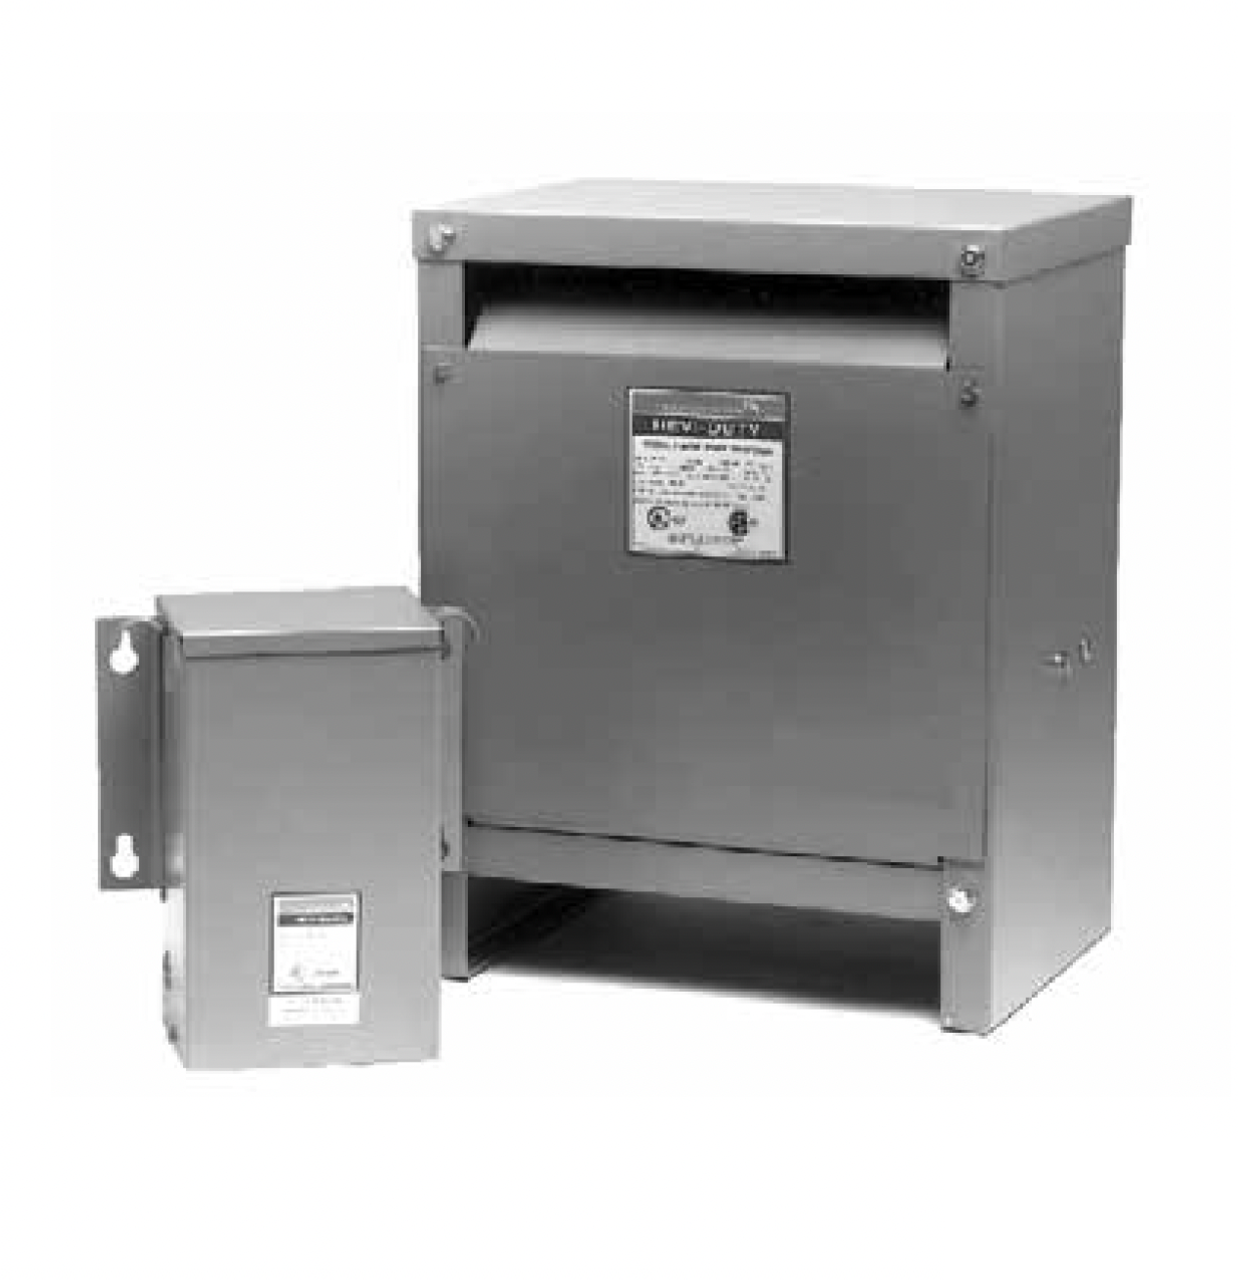 SolaHD Emerson - DT651H75S Dry-Type Distribution Transformers